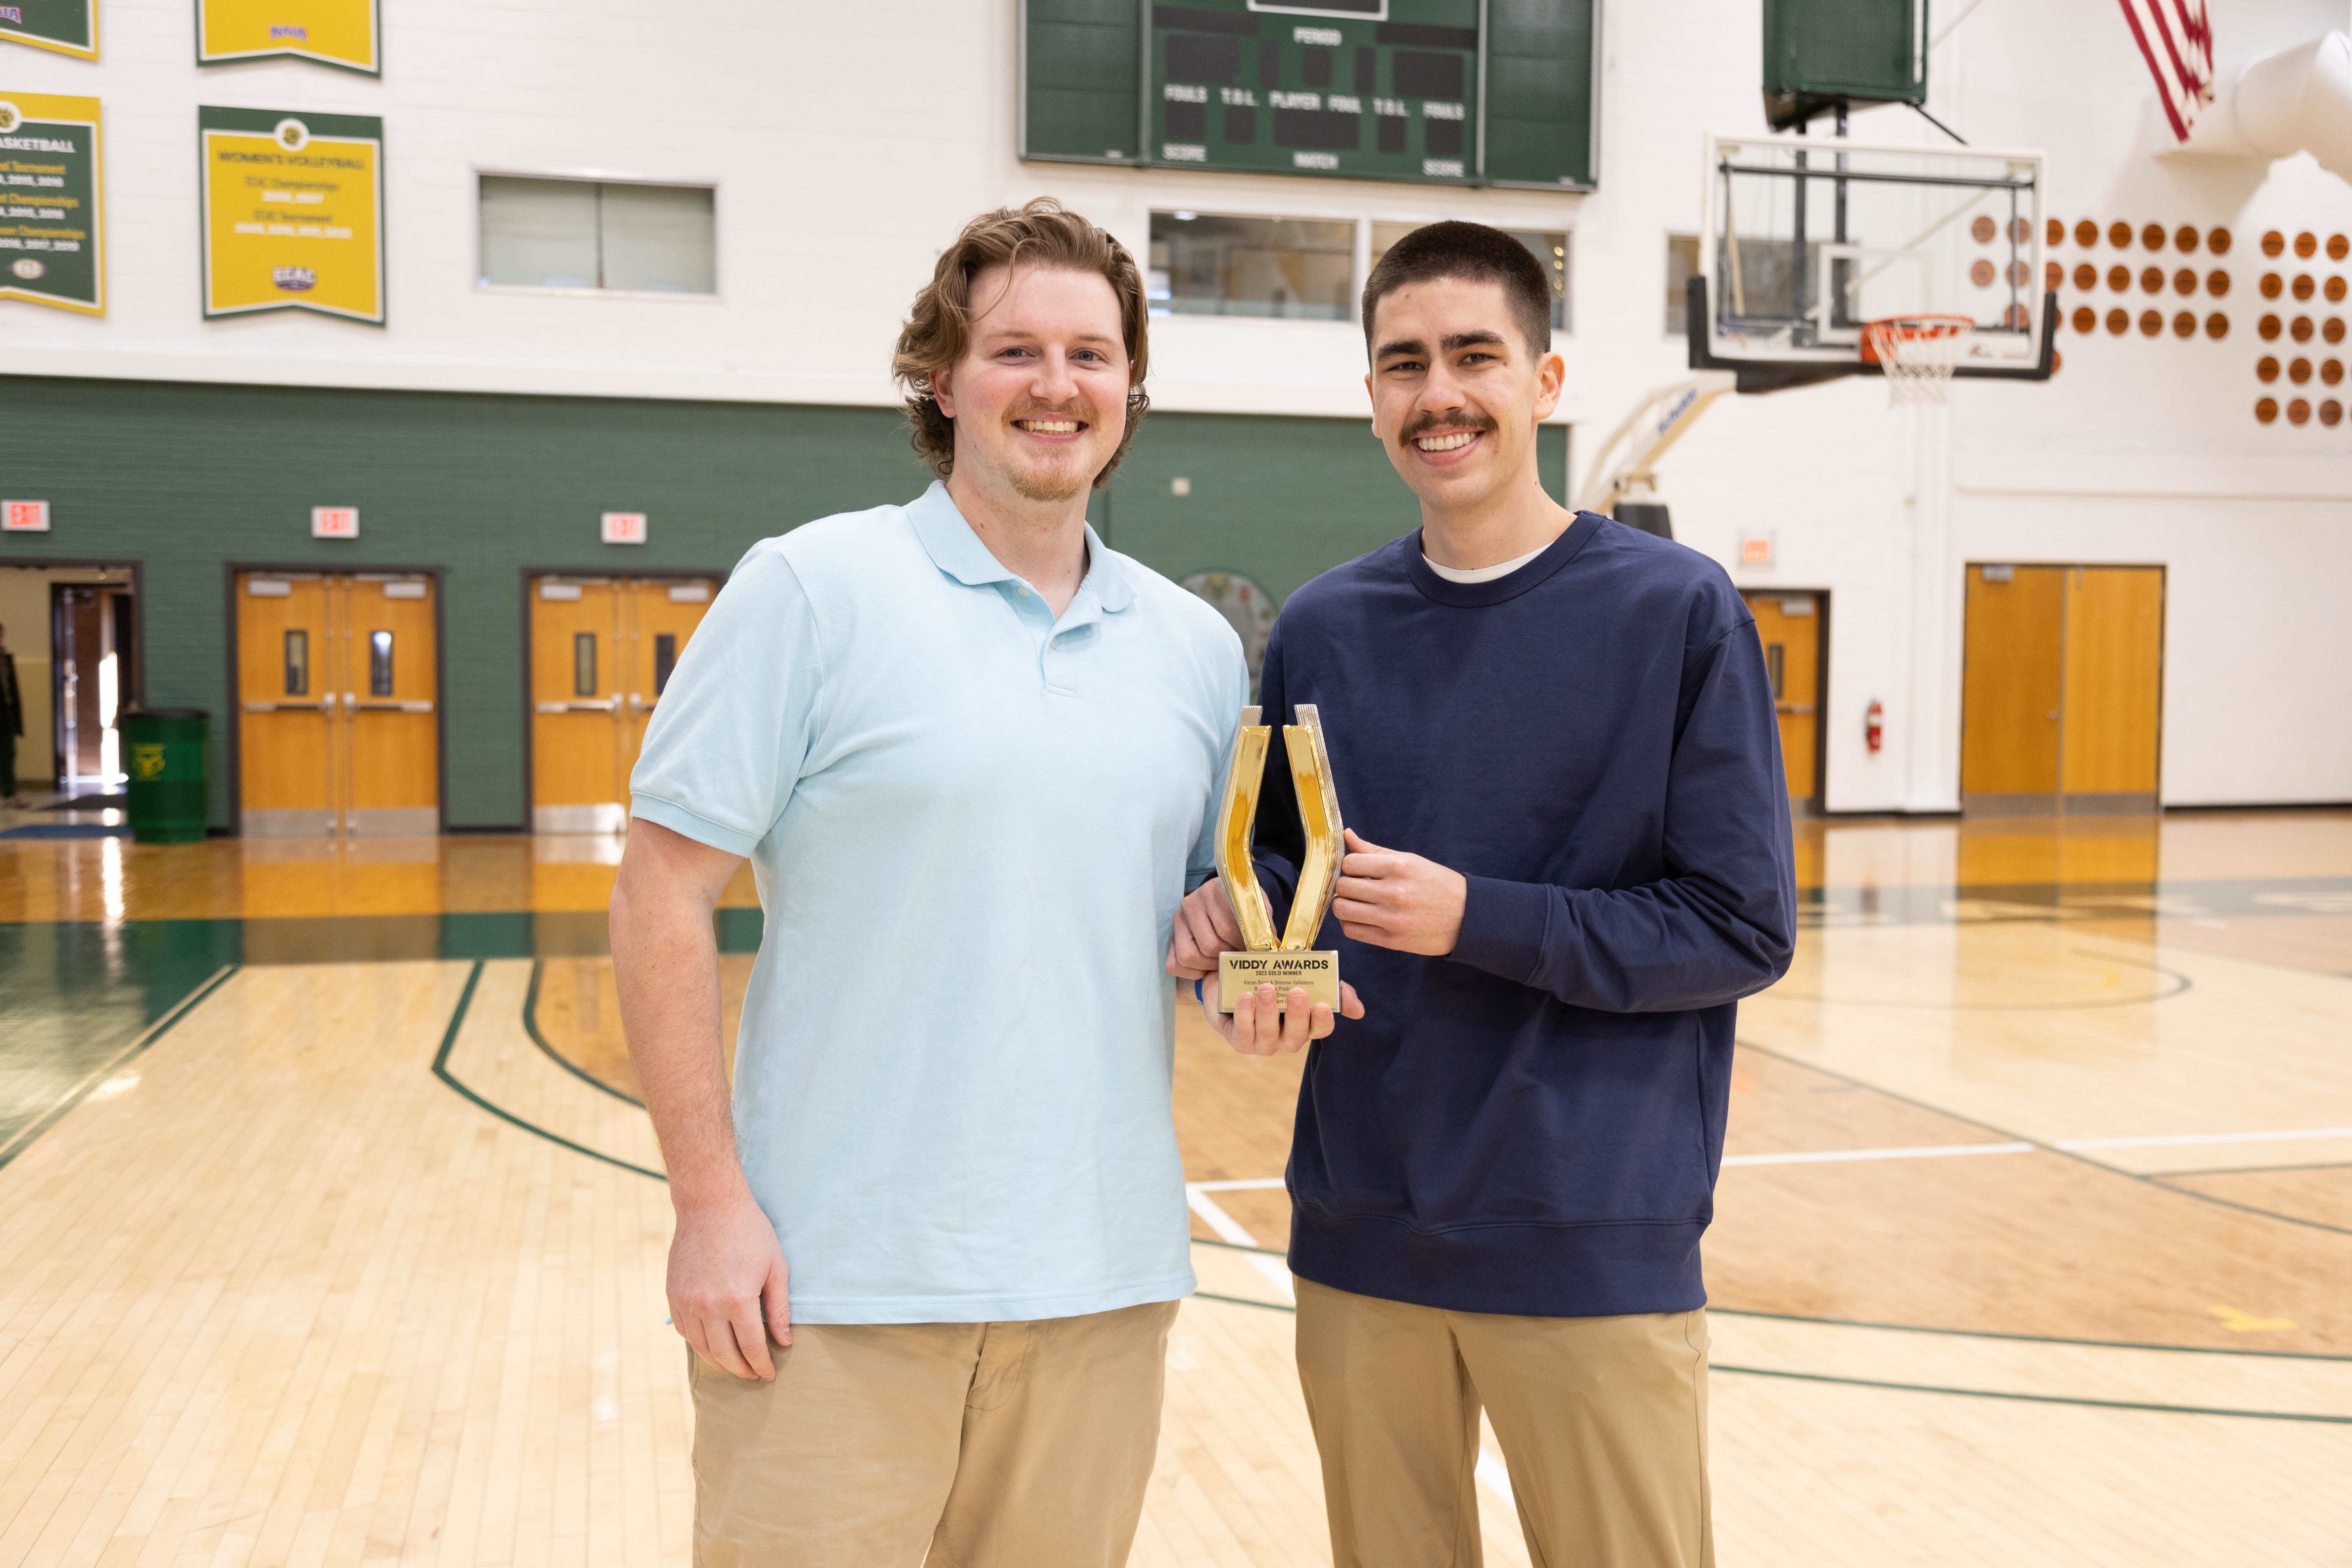 SVC students’ documentary “Don’t Count Us Out” wins Gold Viddy Award